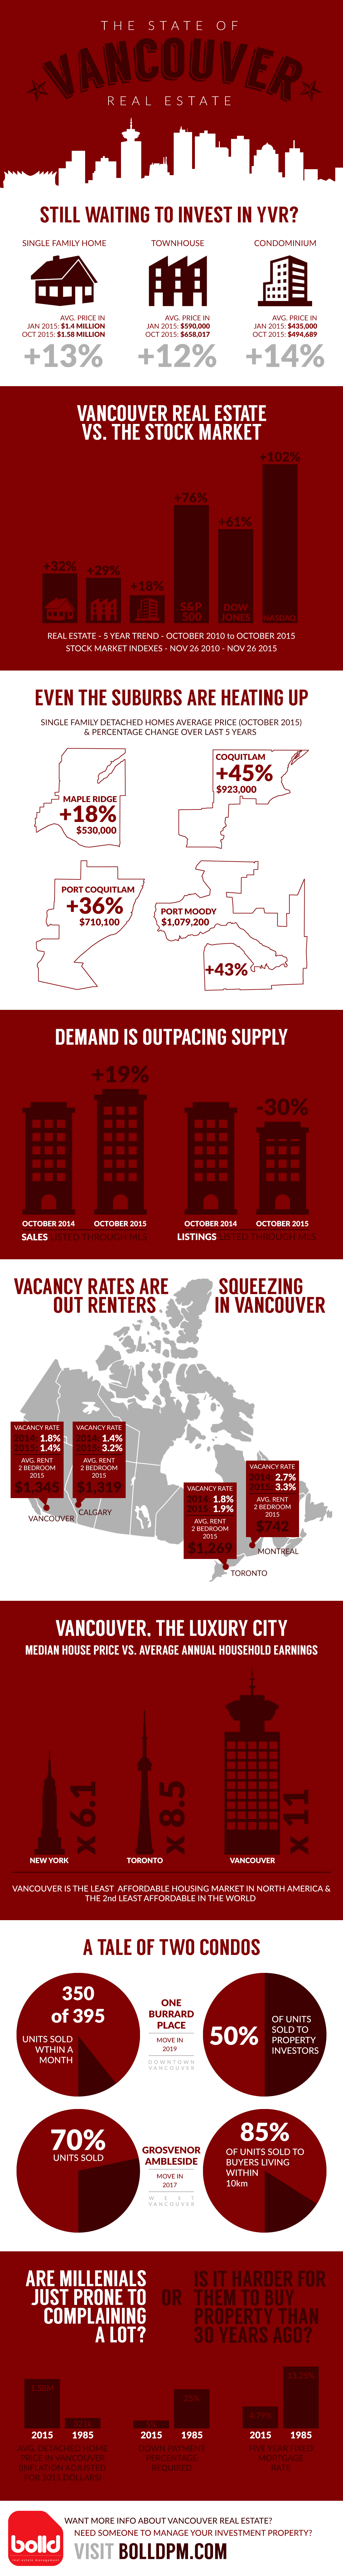 THE-STATE-OF-VANCOUVER-REAL-ESTATE-INFOGRAPHIC-VANCOUVER-REAL-ESTATE-MARKET